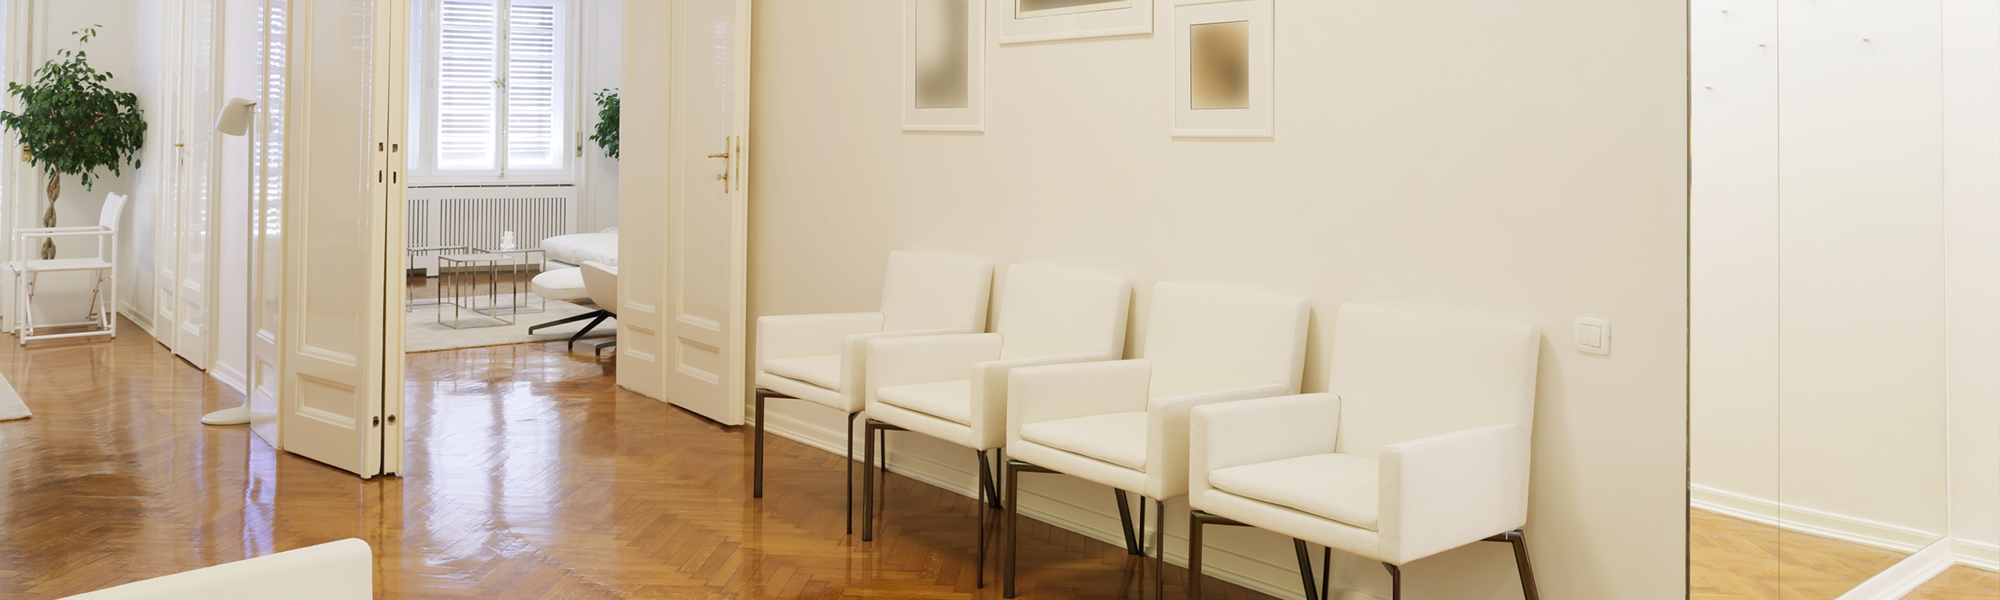 Designing a Medical Office Waiting Room